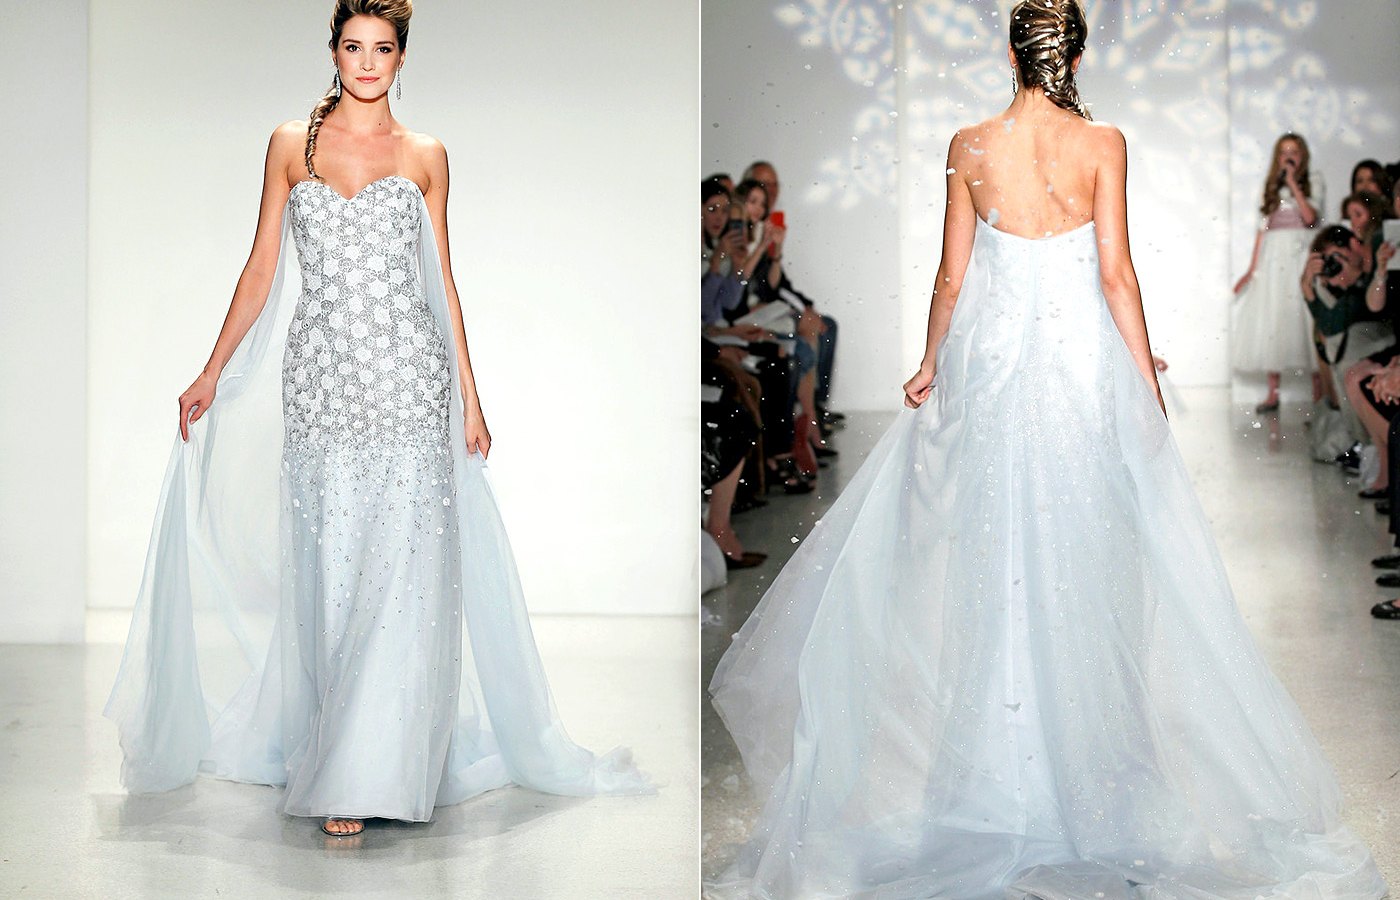 Frozen inspired wedding dress by Disney and Alfred Angelo